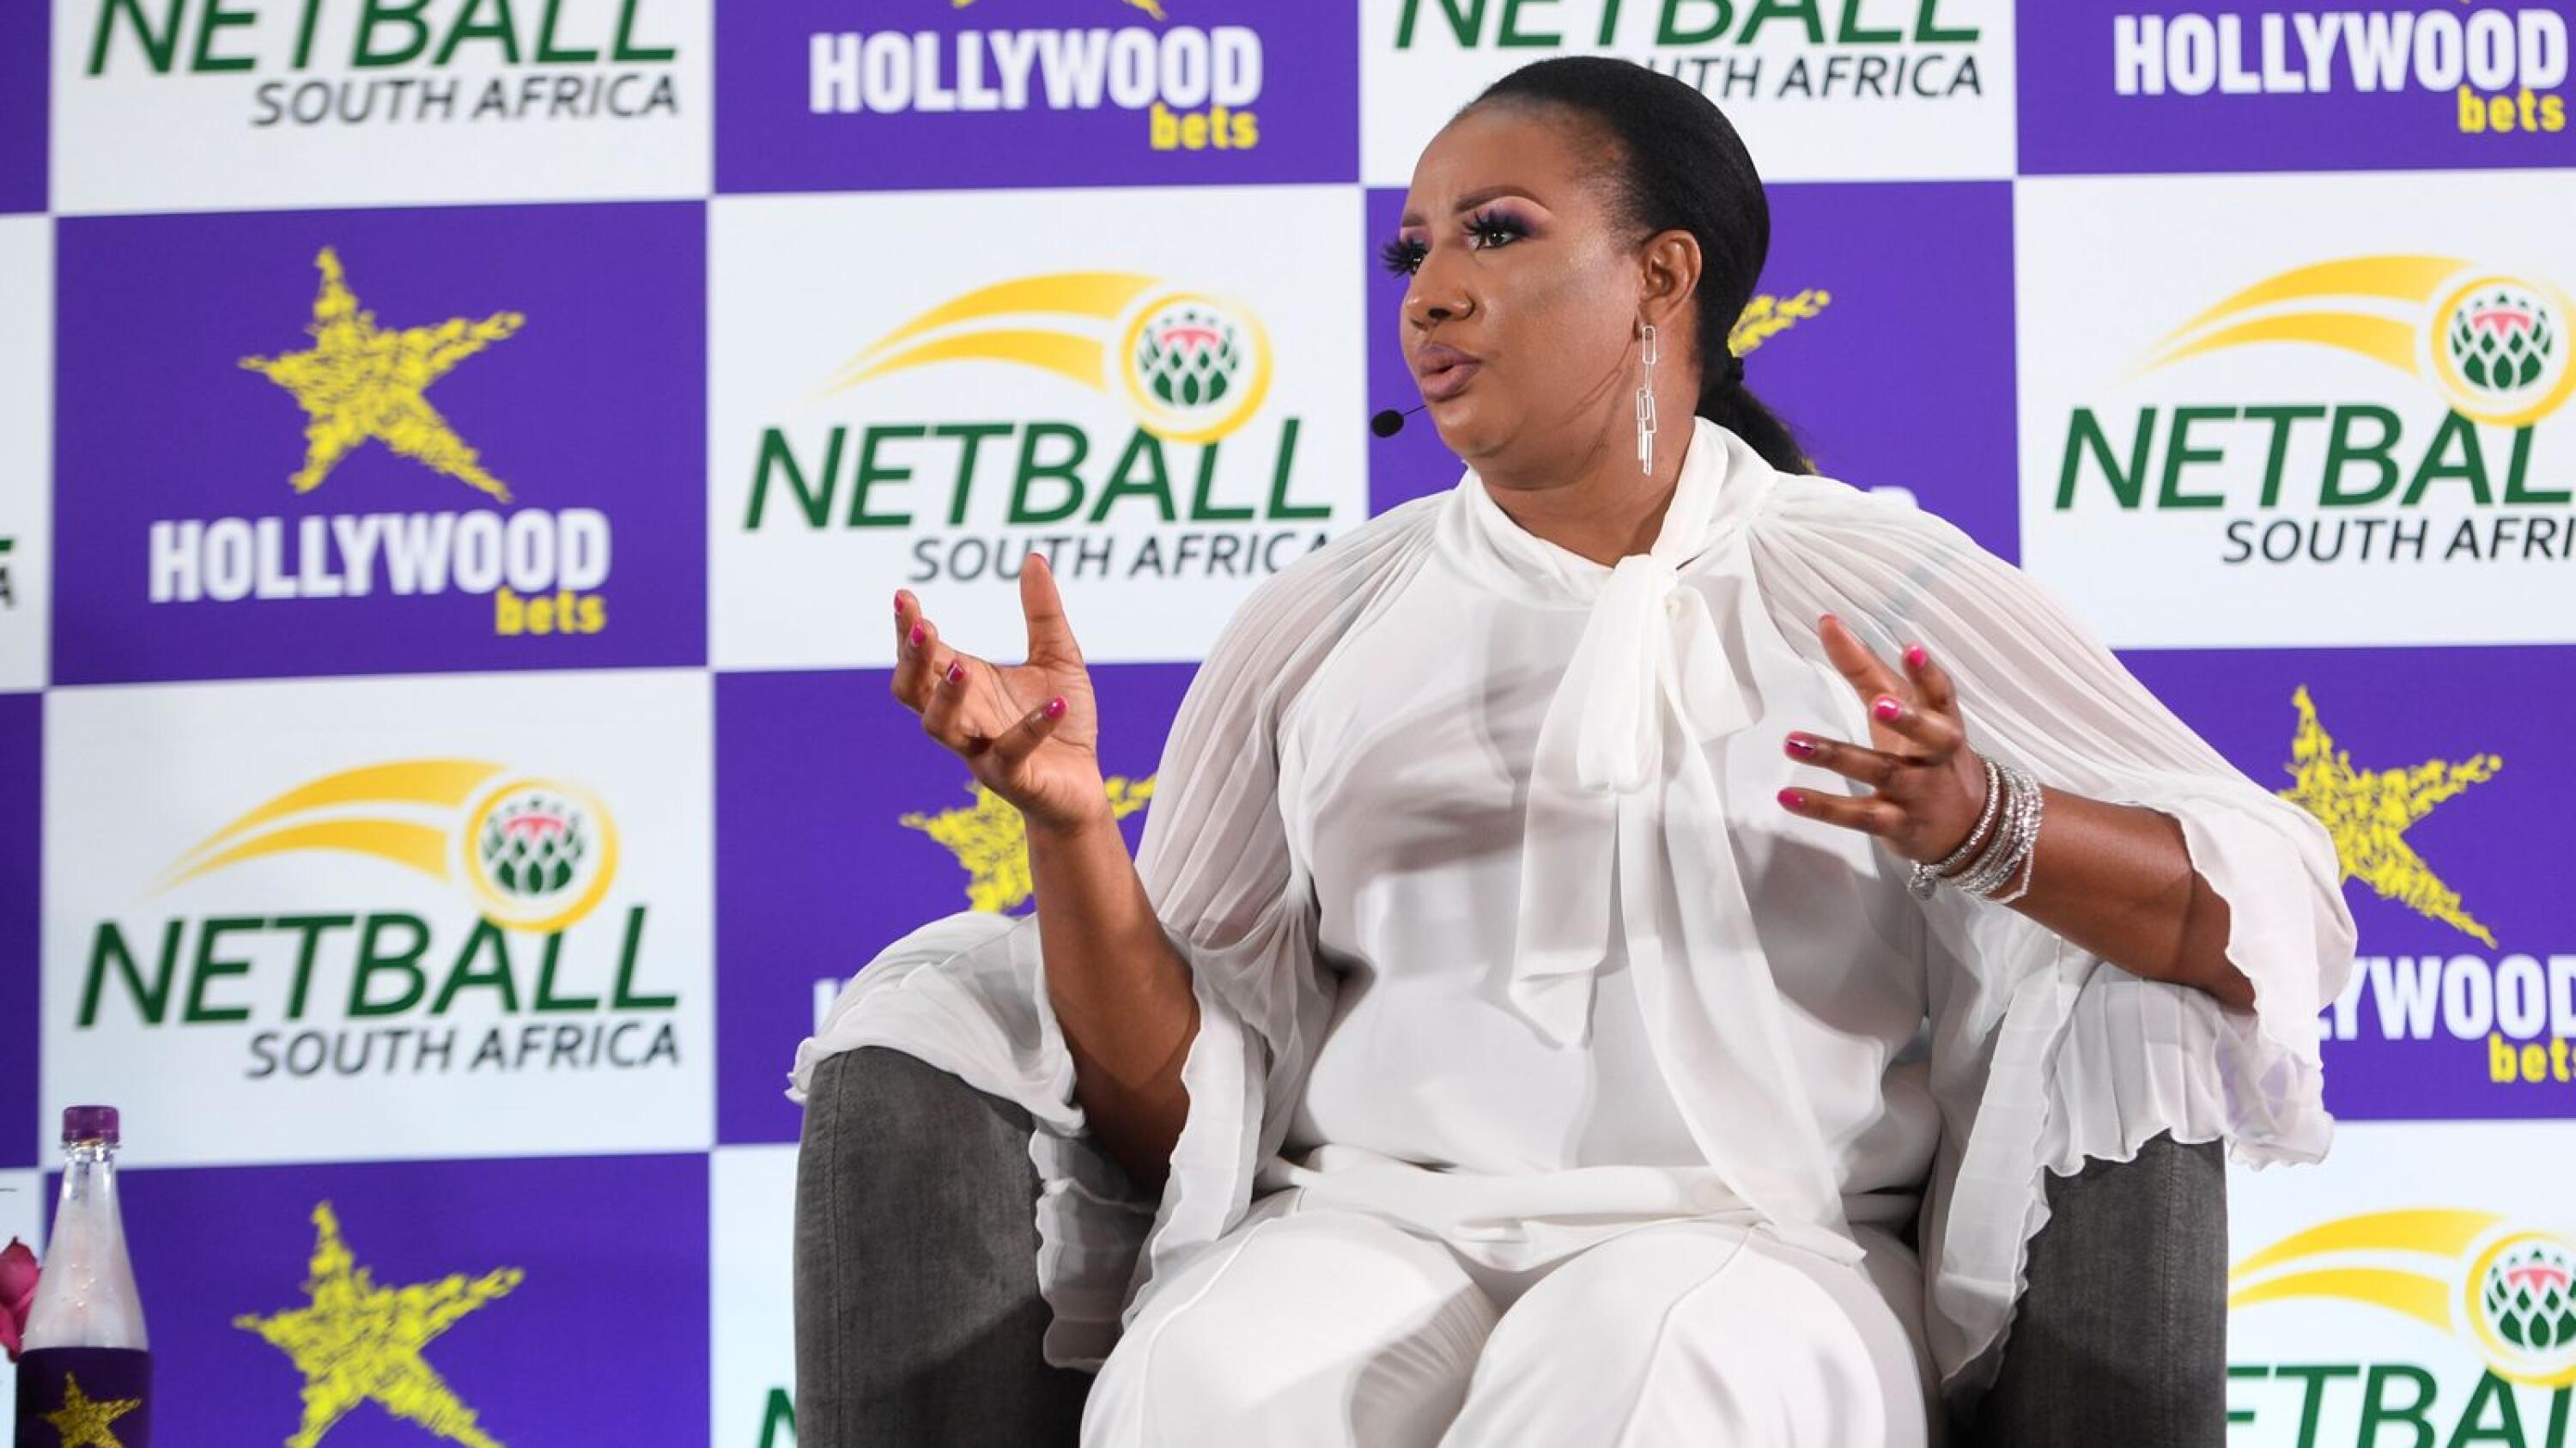 Netball South Africa president Cecilia Molokwane during a press conference